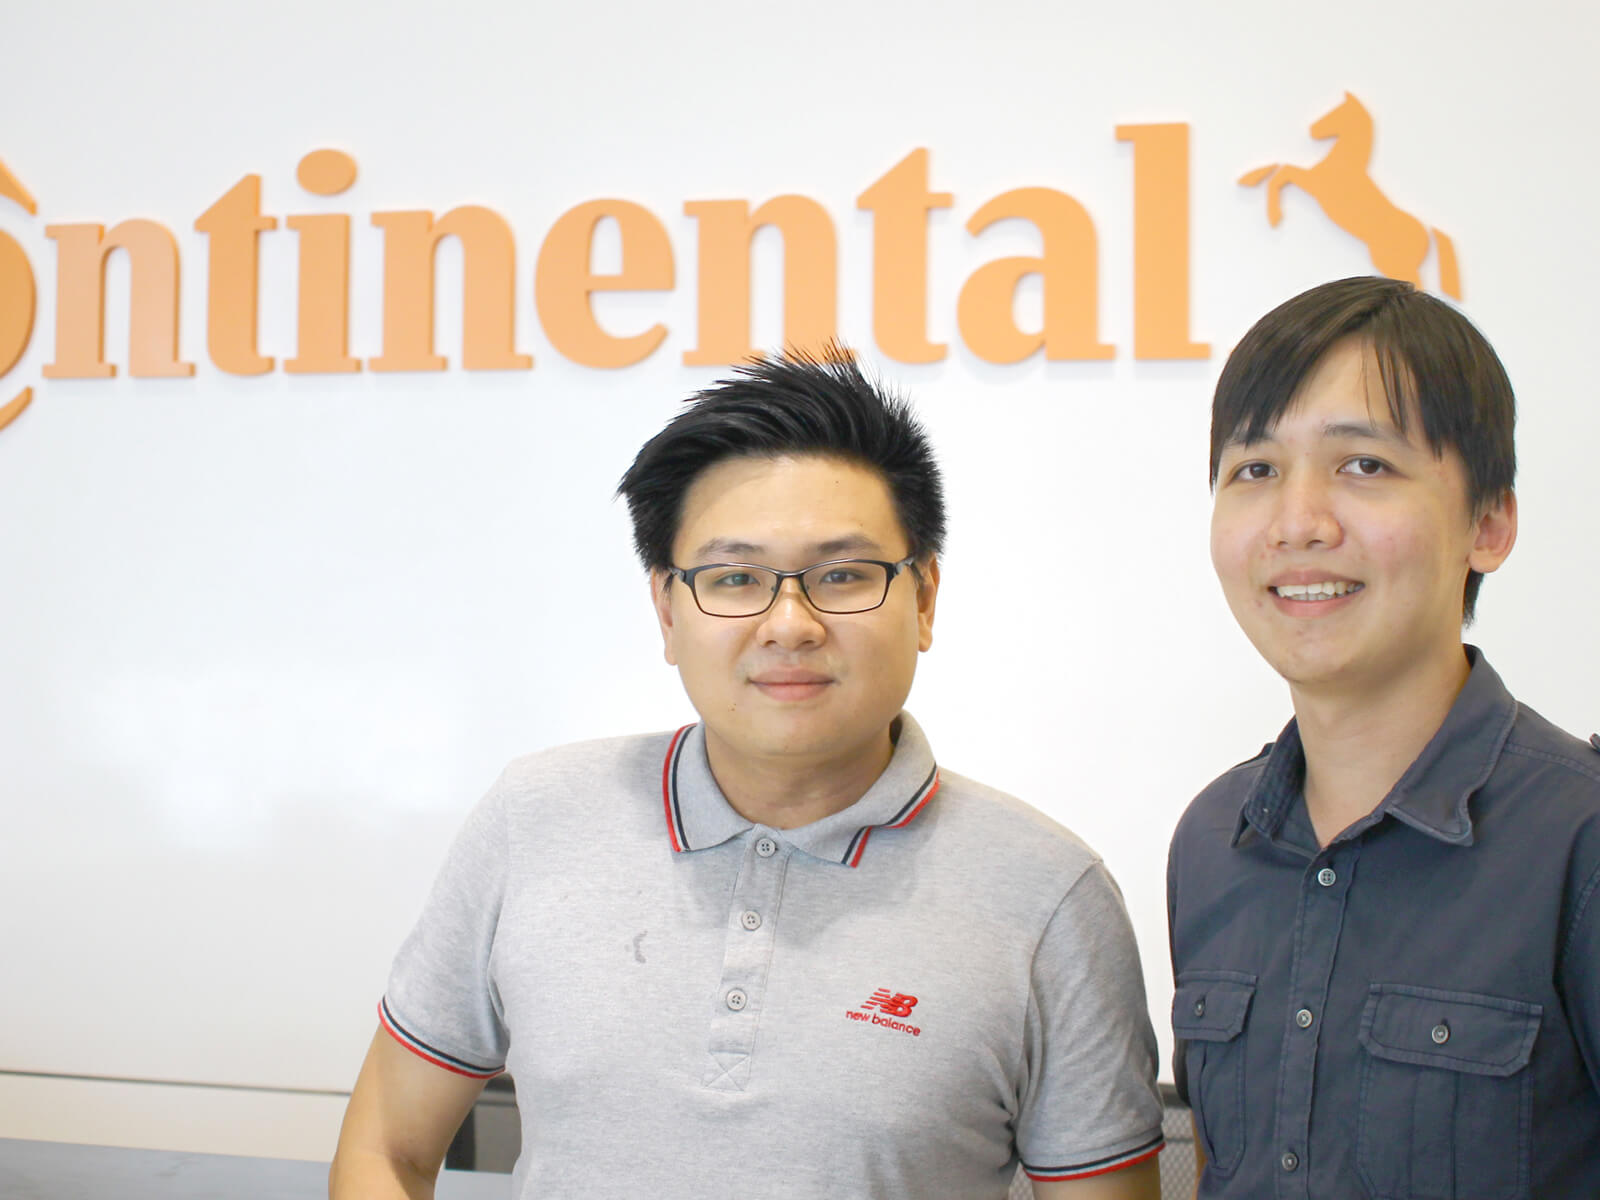 DigiPen (Singapore) alumni Jason Ngai and David Seah pose for a photo in front of a white wall adorned with the orange Continental logo